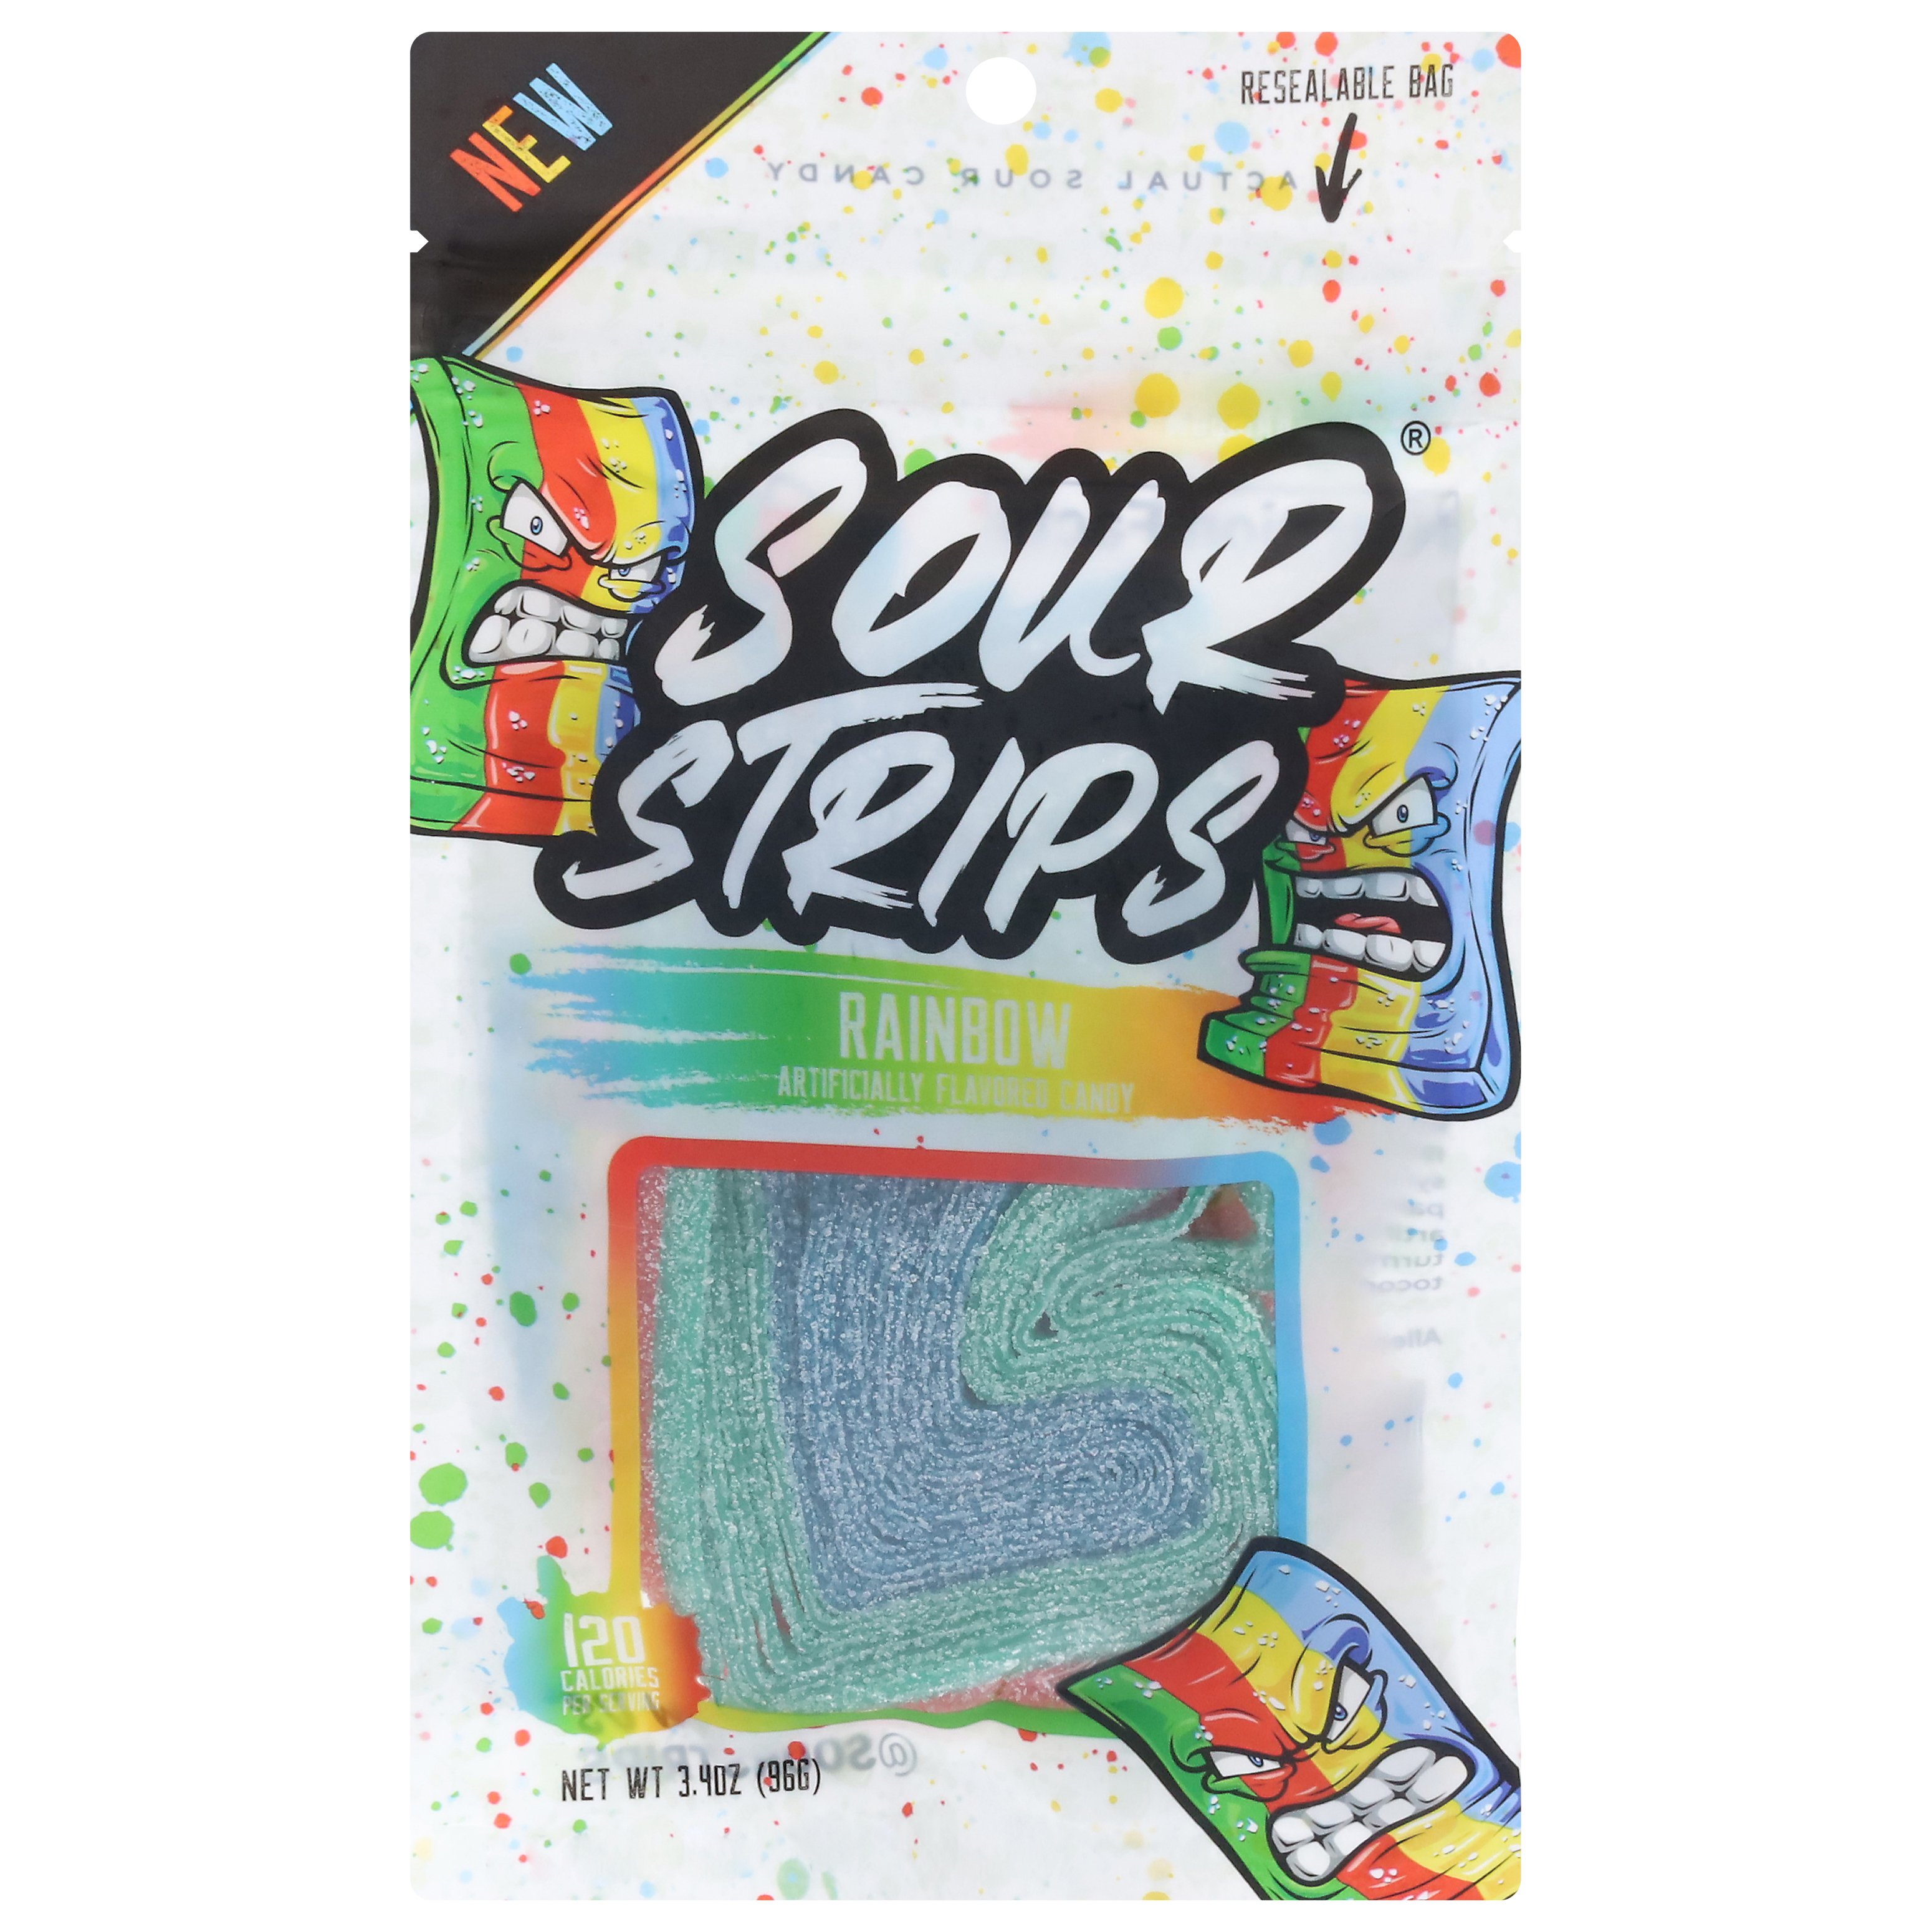 Sour Strips Rainbow Flavor Candy Shop Candy At H E B